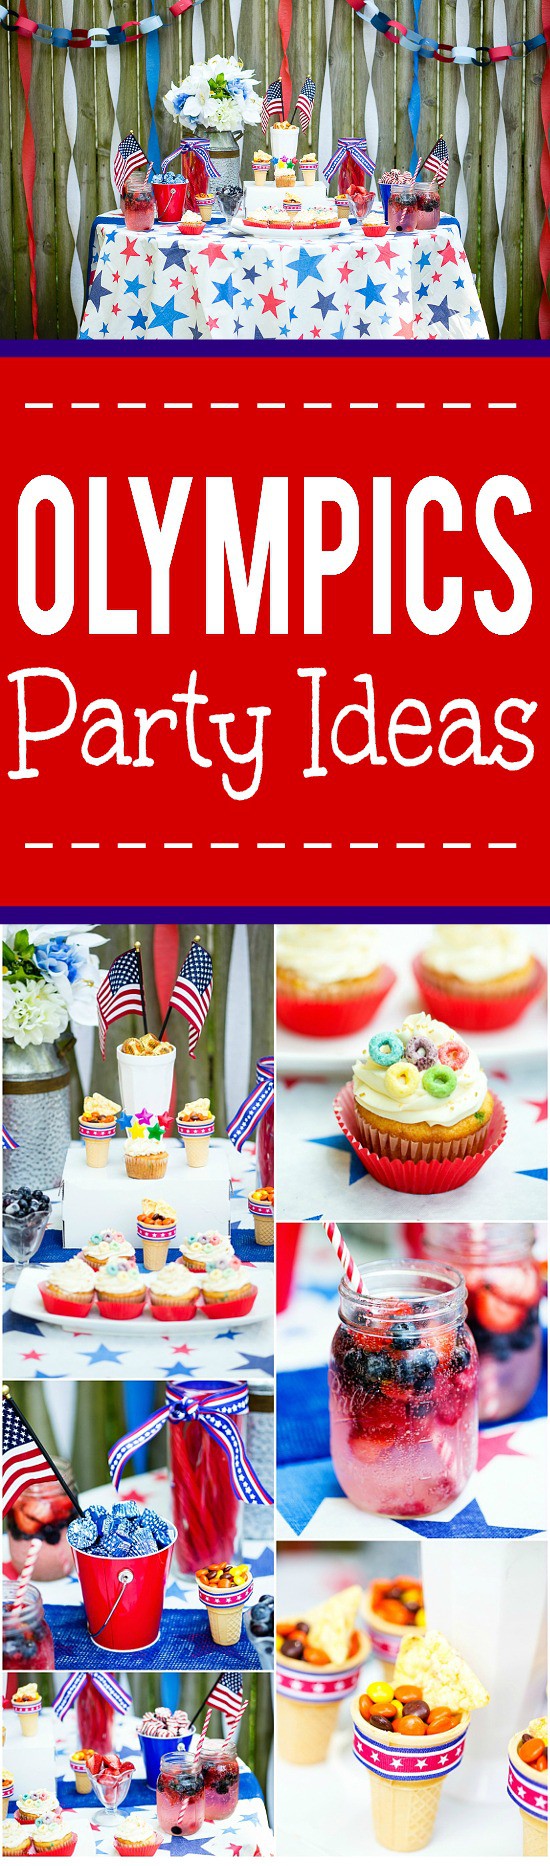 Olympics Party Ideas - Get ready to cheer Team USA on to go for the gold with these fabulous and fun Olympics party ideas to host an amazing Olympics party celebration, including cute Olympics party food and patriotic Team USA party decorations.